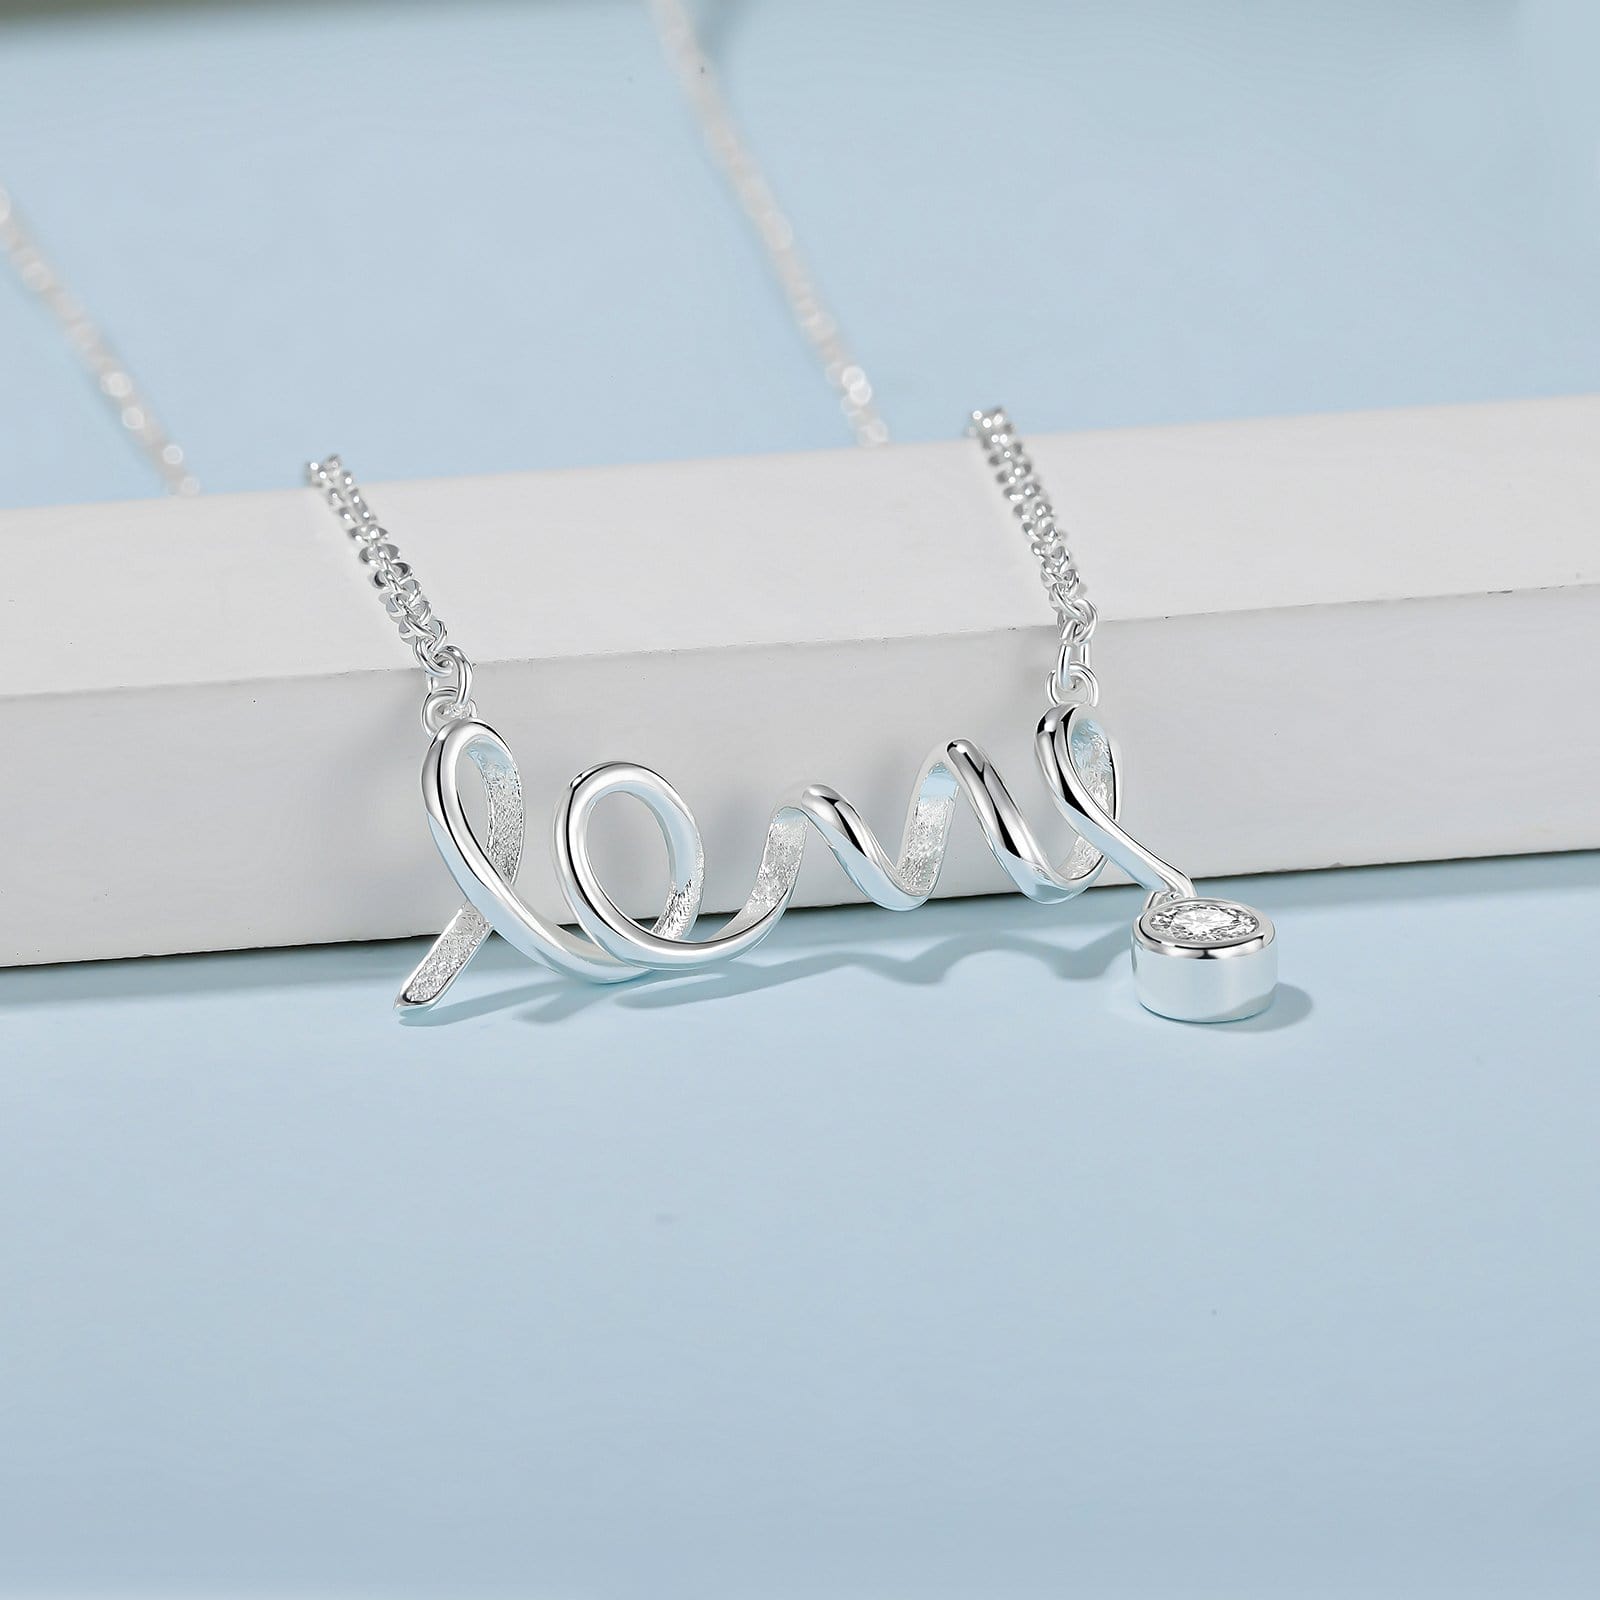 Necklaces To My Future Wife - You Are Always In Mine Love Pendant Necklace GiveMe-Gifts